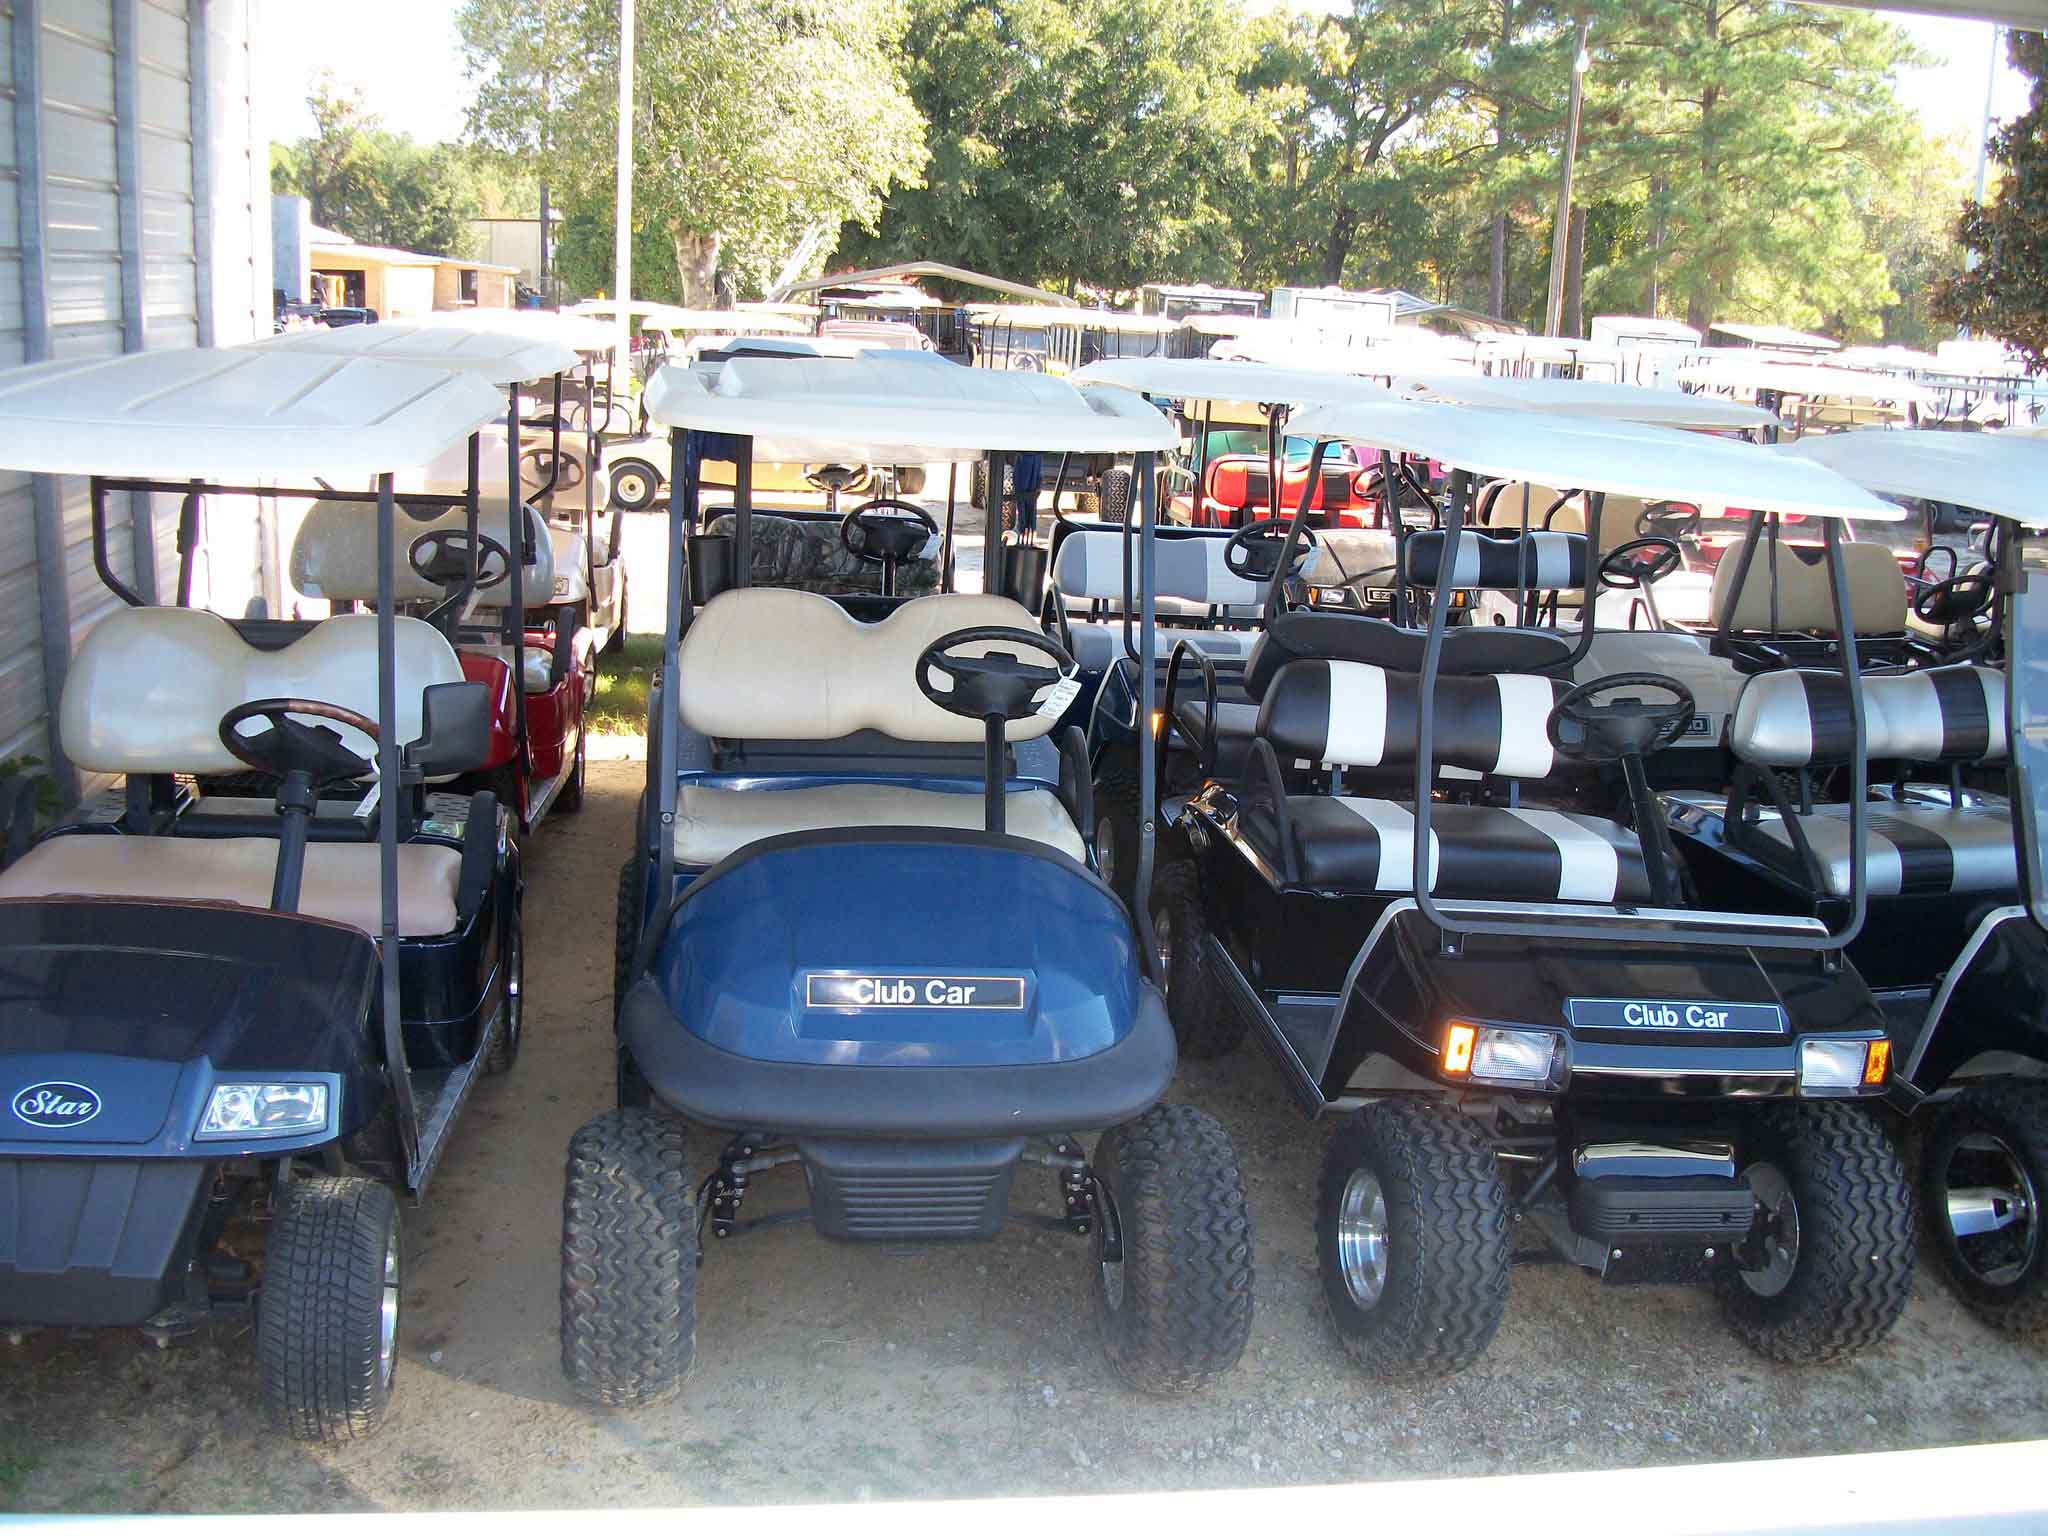 Lot with many Golf cars